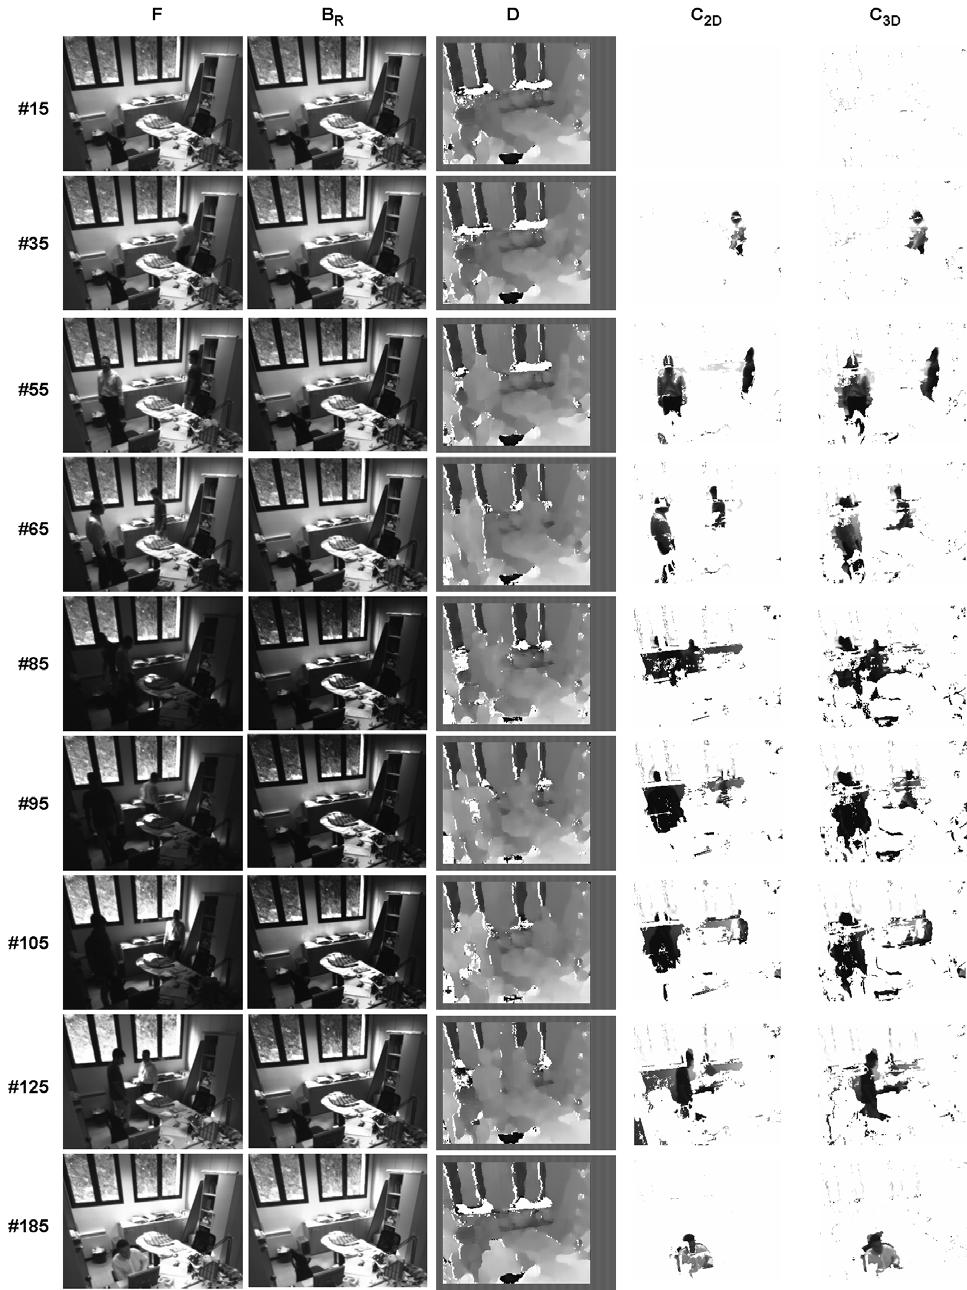 Figure 5. Experimental results on 9 frames of the Office stereo sequence using the disparity map provided by the SMP algorithm [3]. (First column) - Reference image F of the stereo pair.